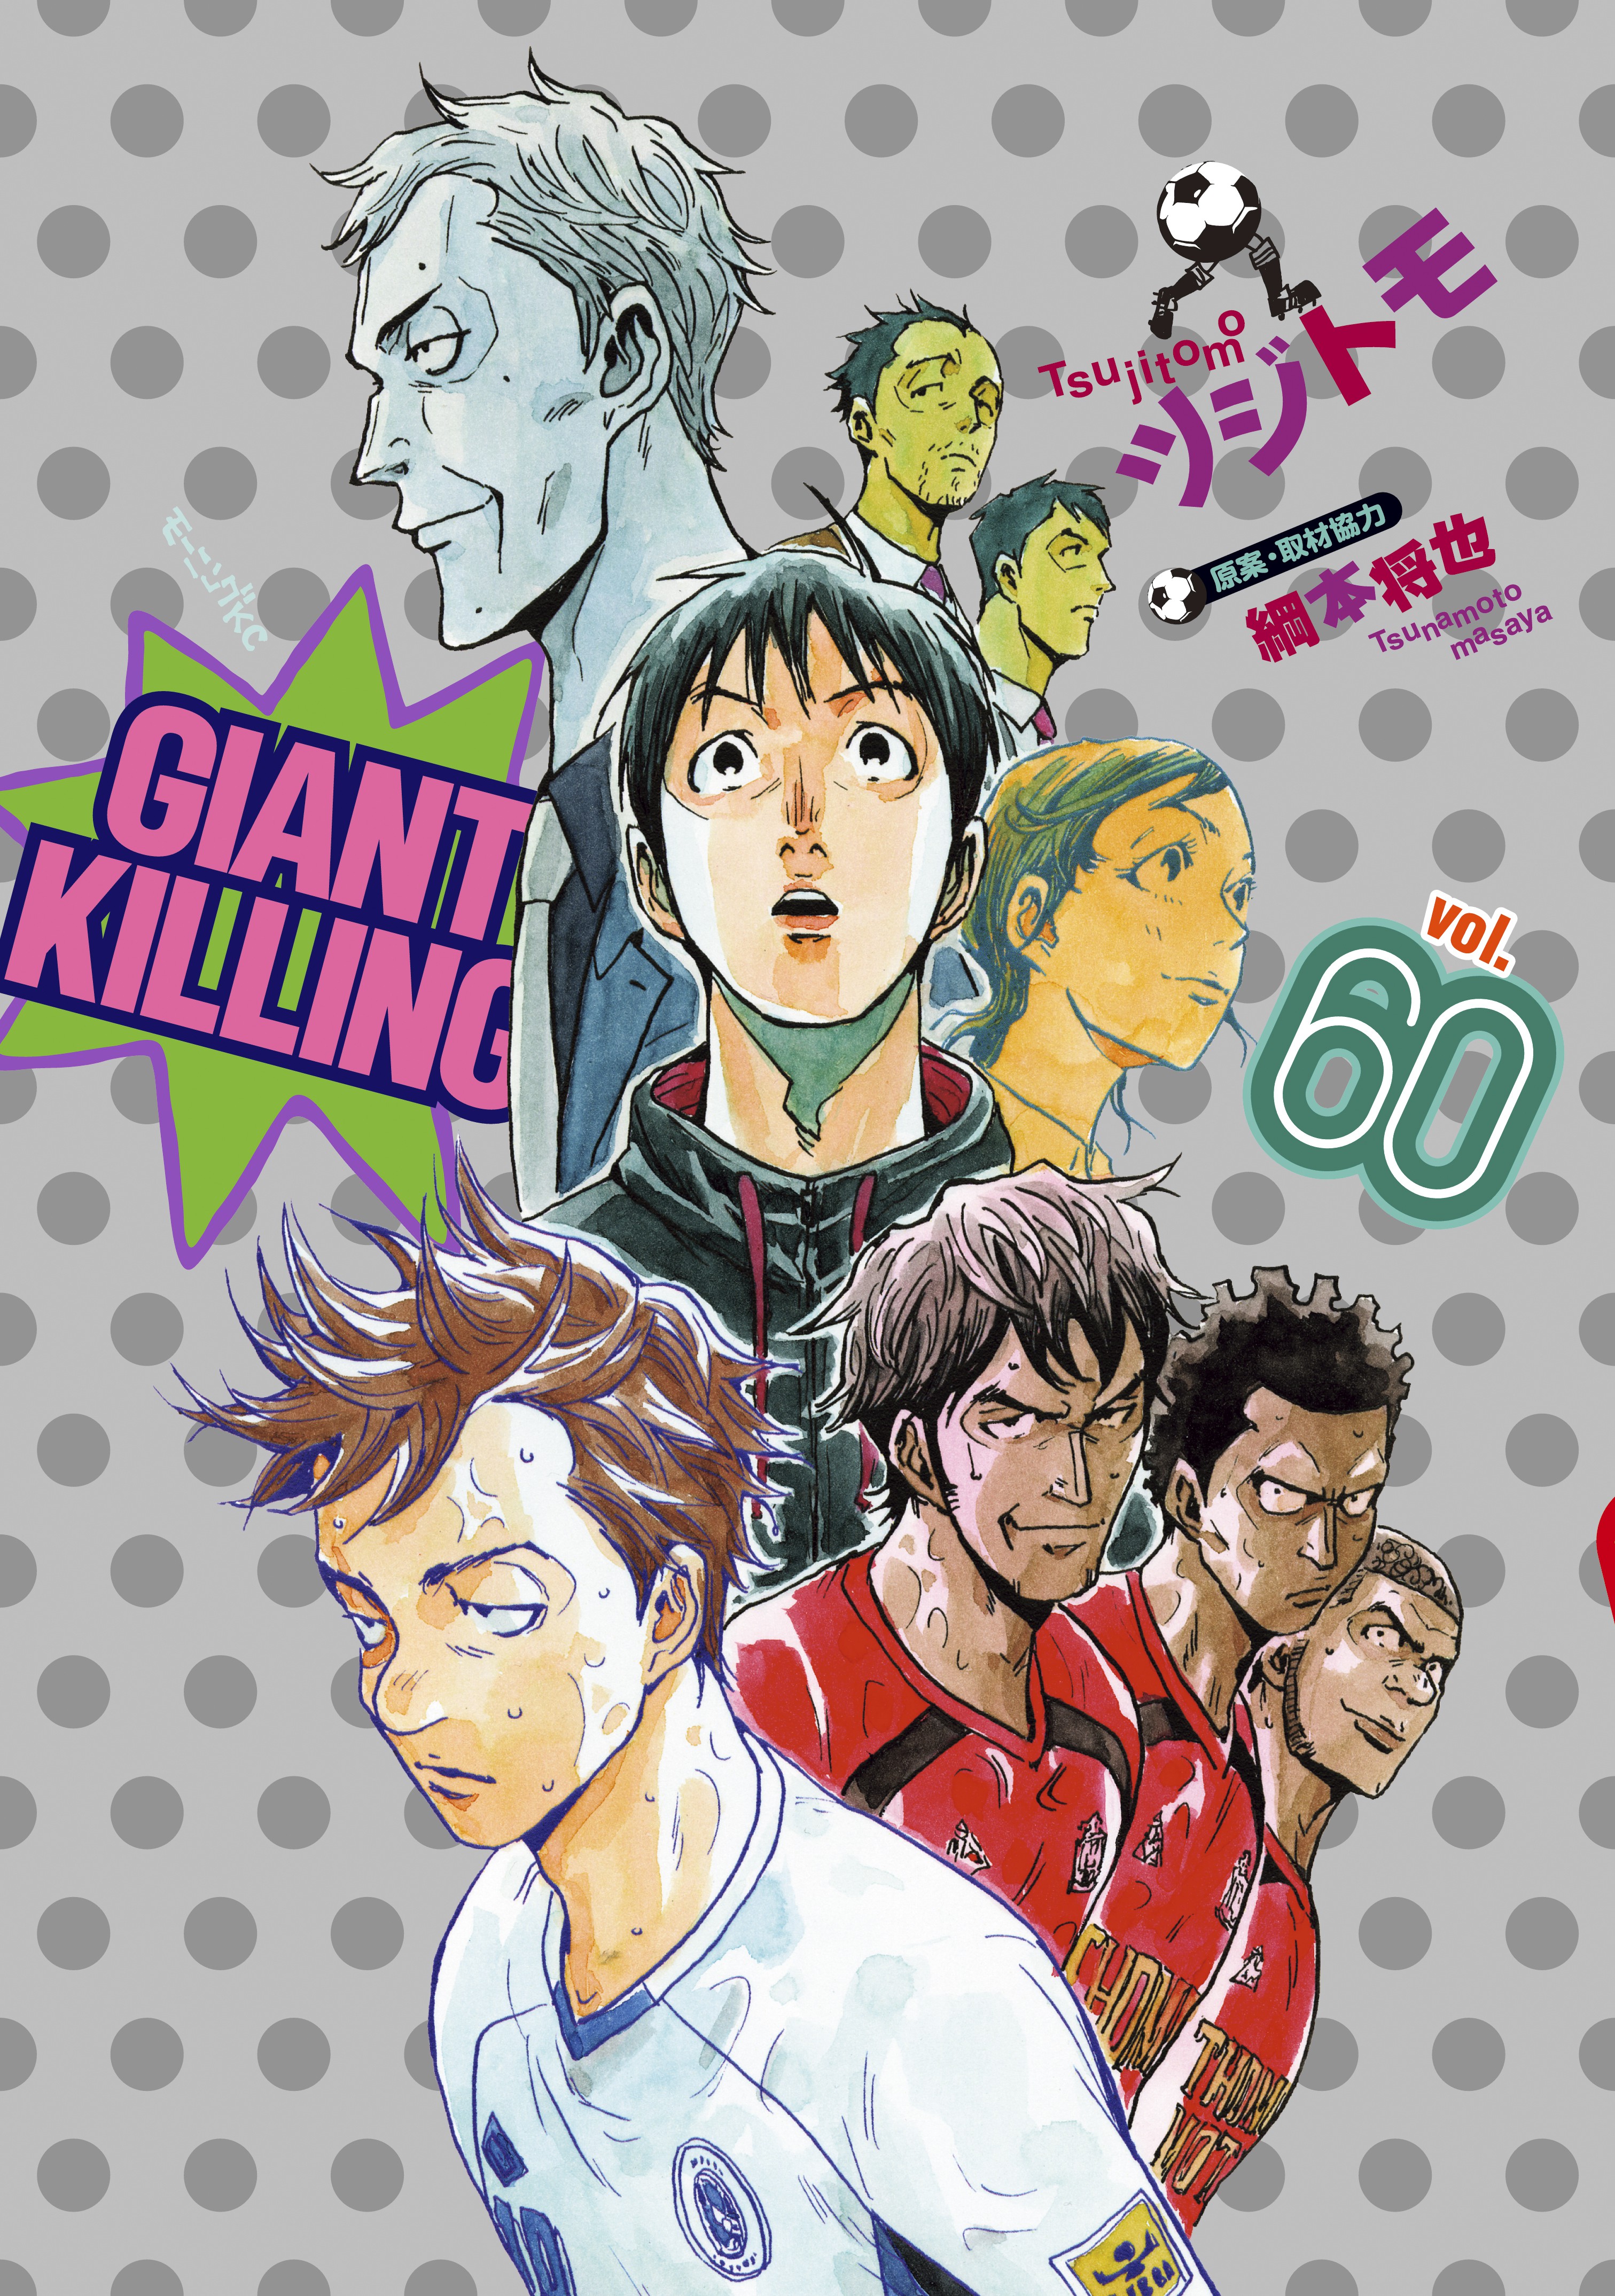 Giant killing capitulo 14, By Giant killing